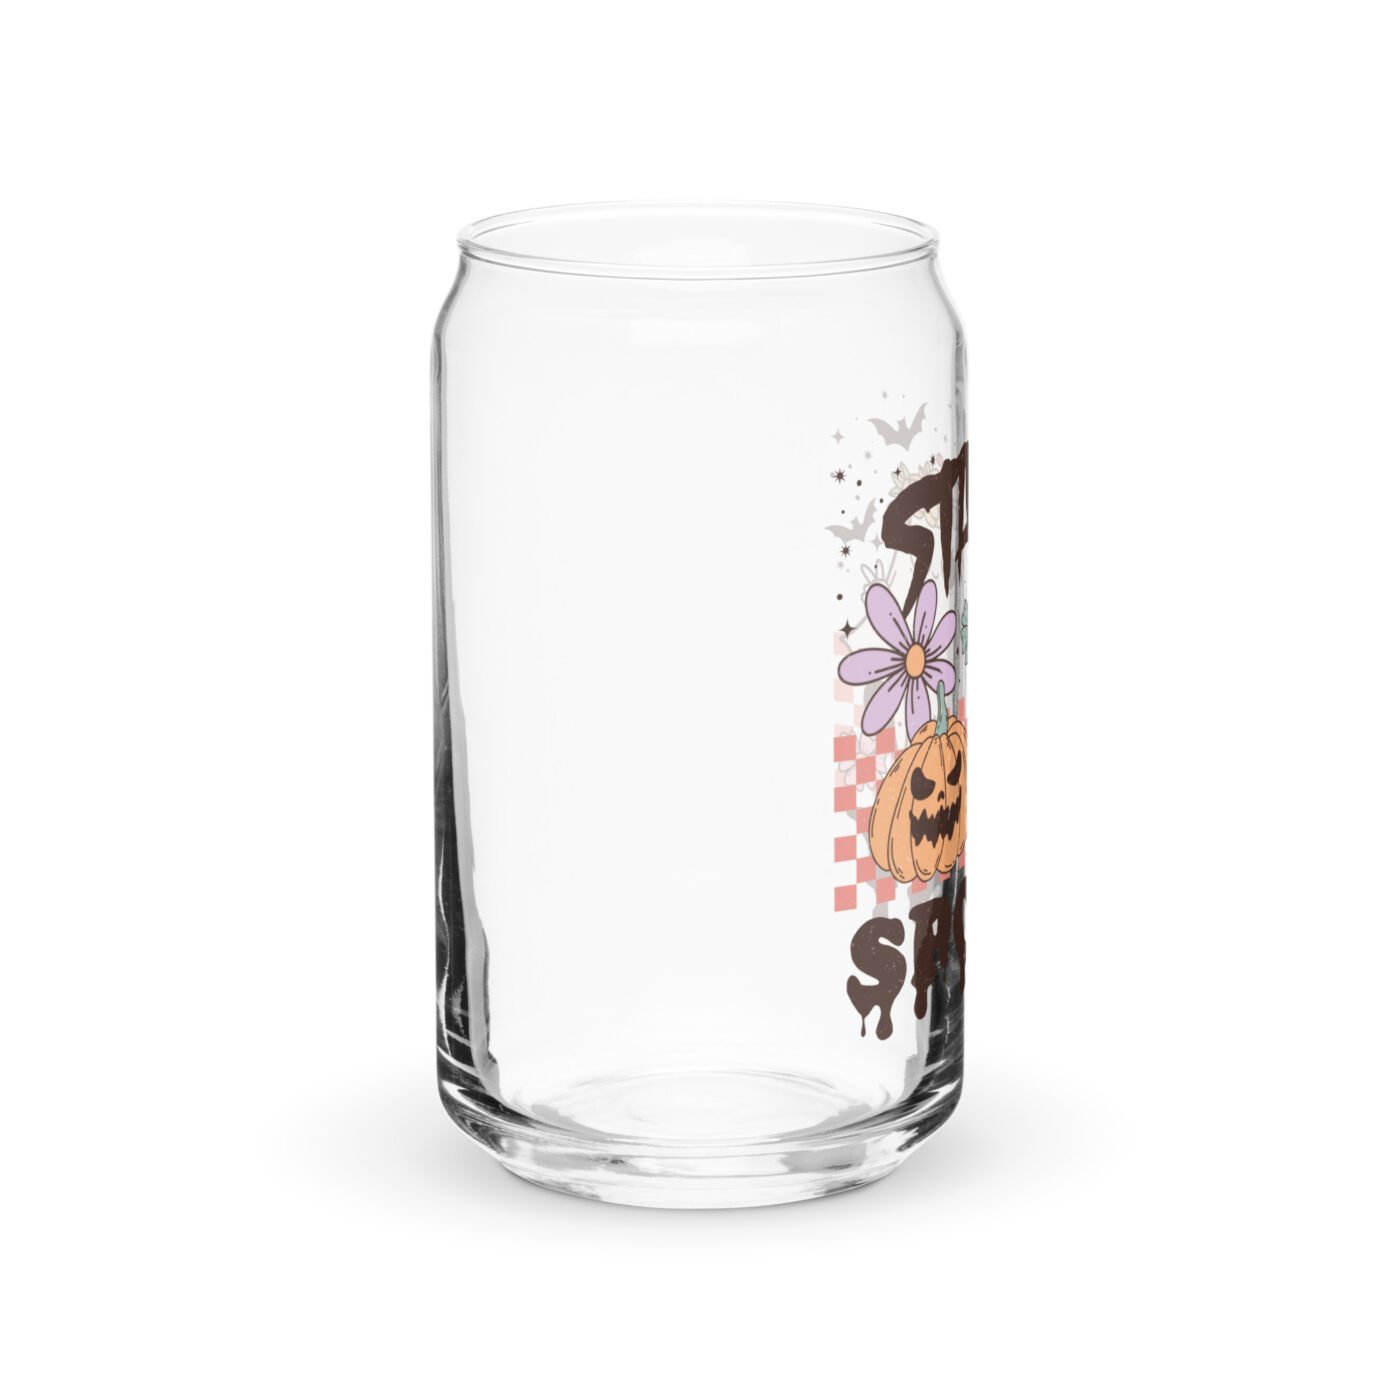 can shaped glass 16 oz right 651dc1adc073d 1.jpg